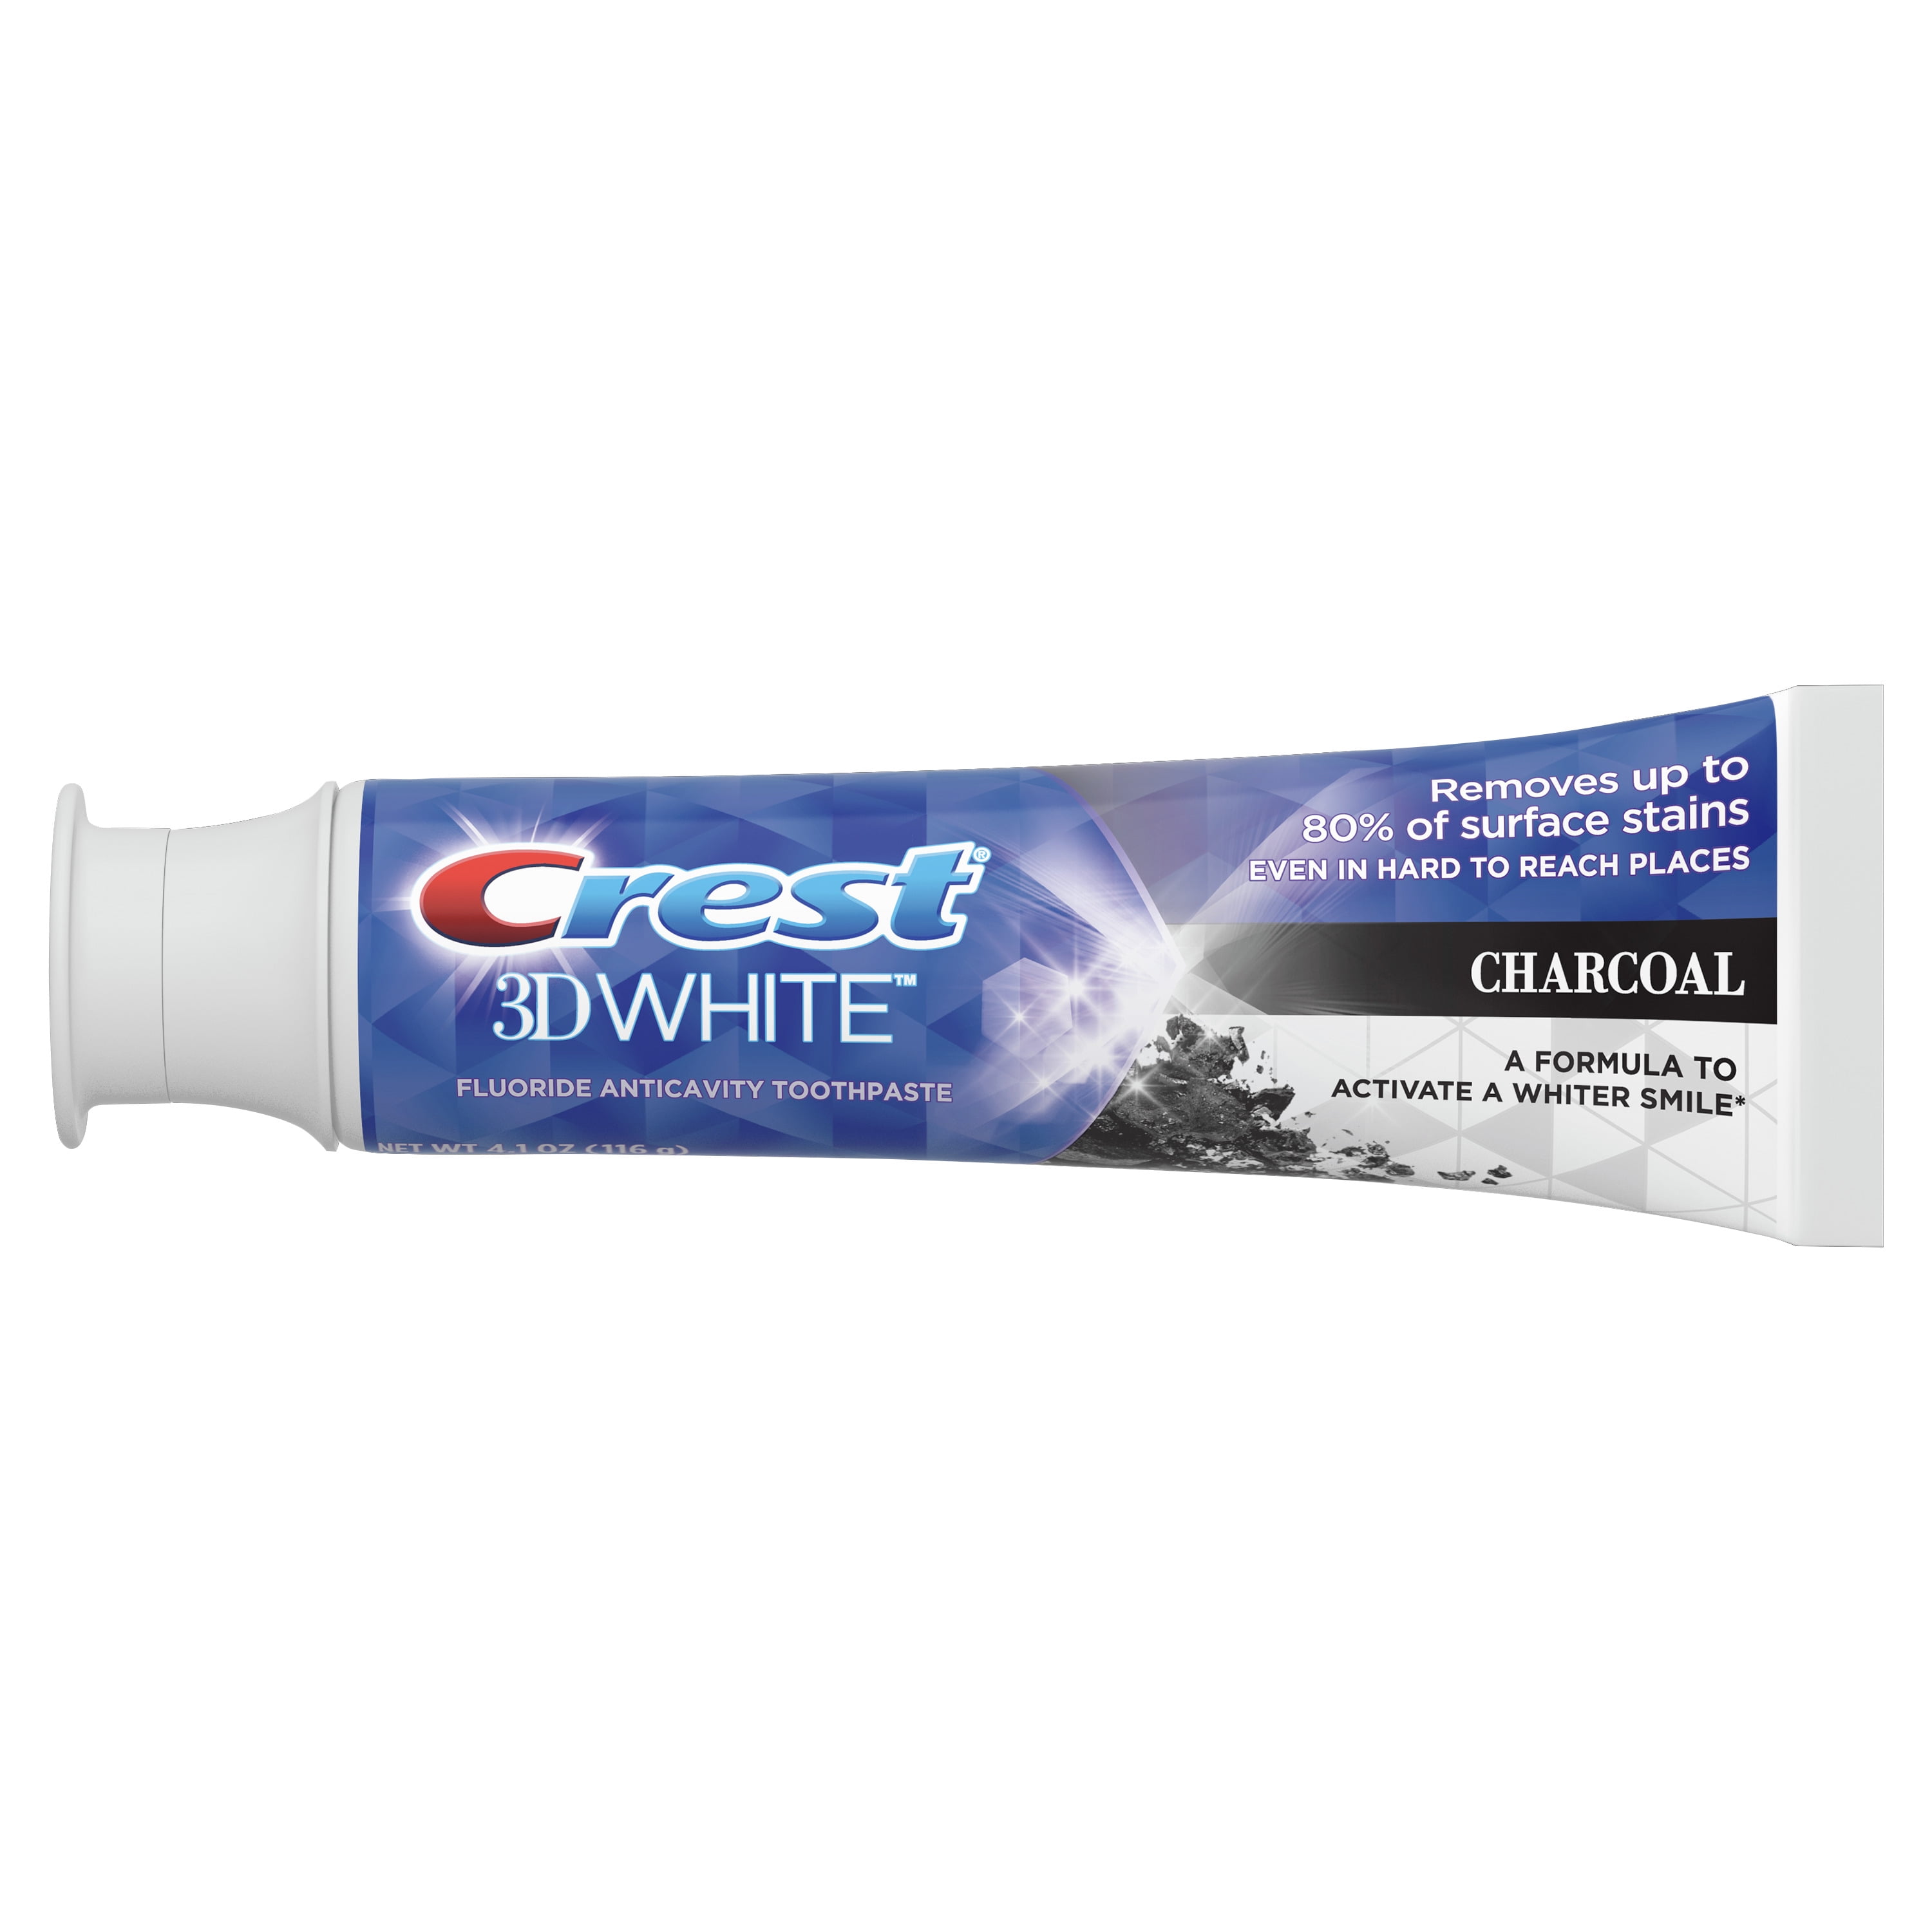 Crest 3D White Charcoal Teeth Whitening Toothpaste (Pack of 2), 2 packs -  Gerbes Super Markets